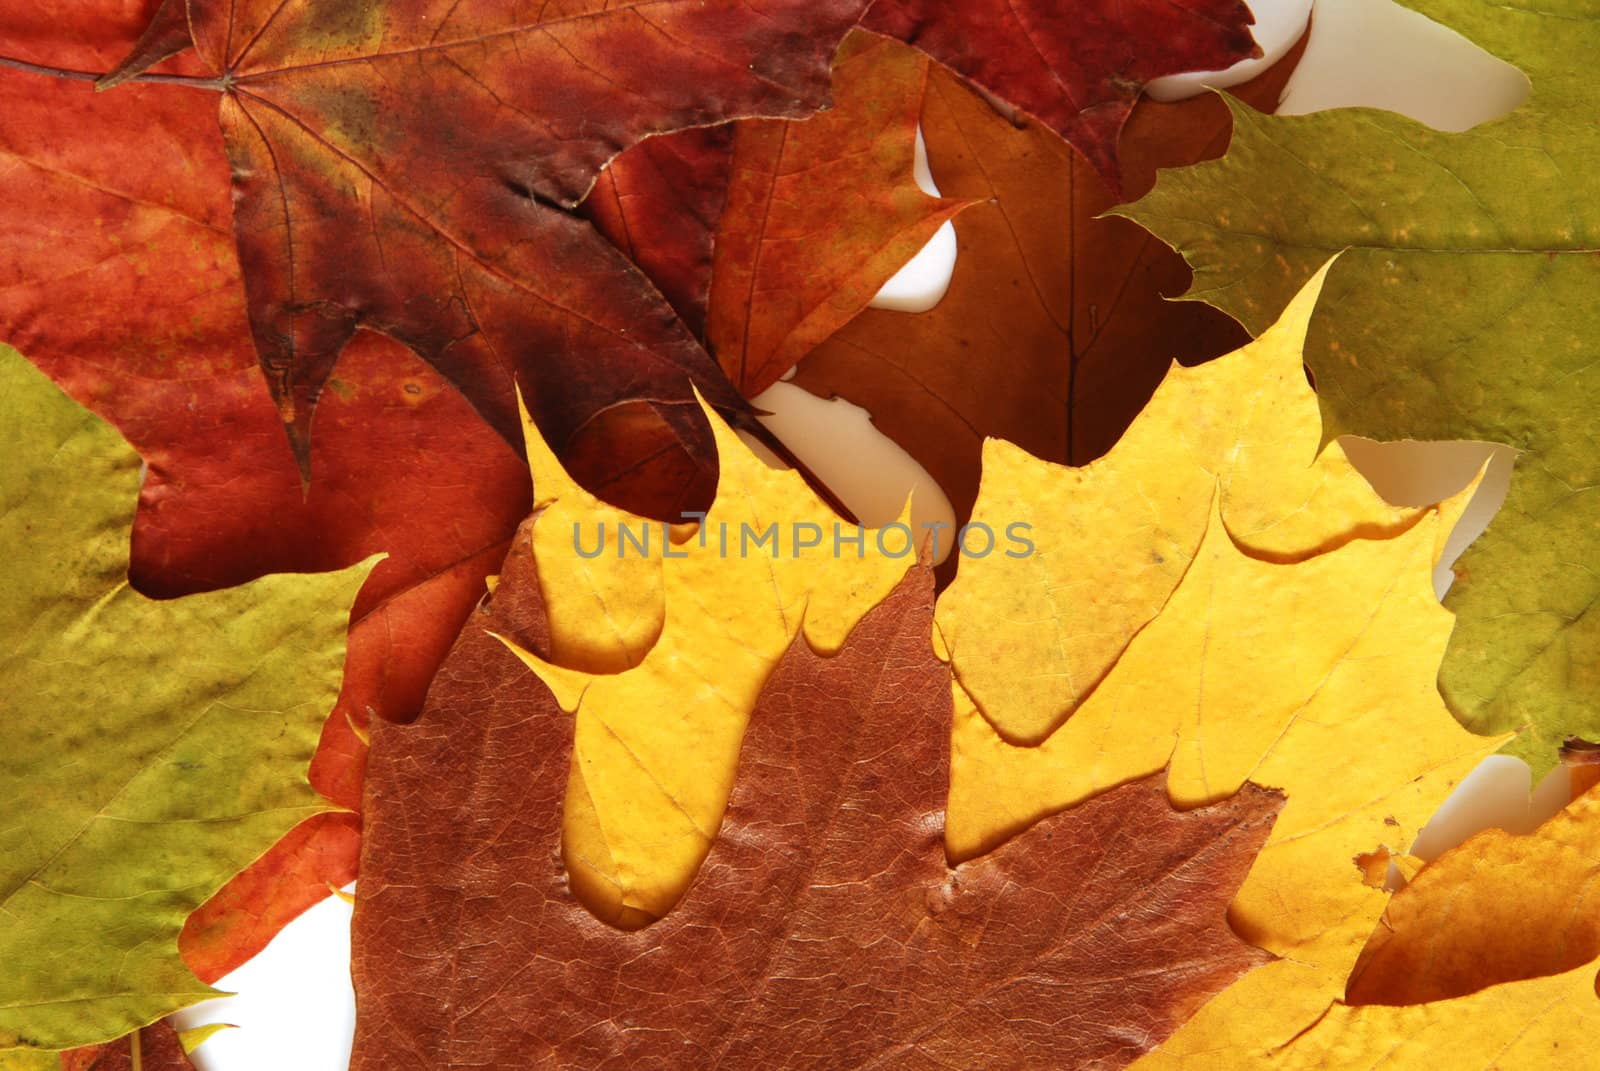 Colorful maple leaves isolated on the white background